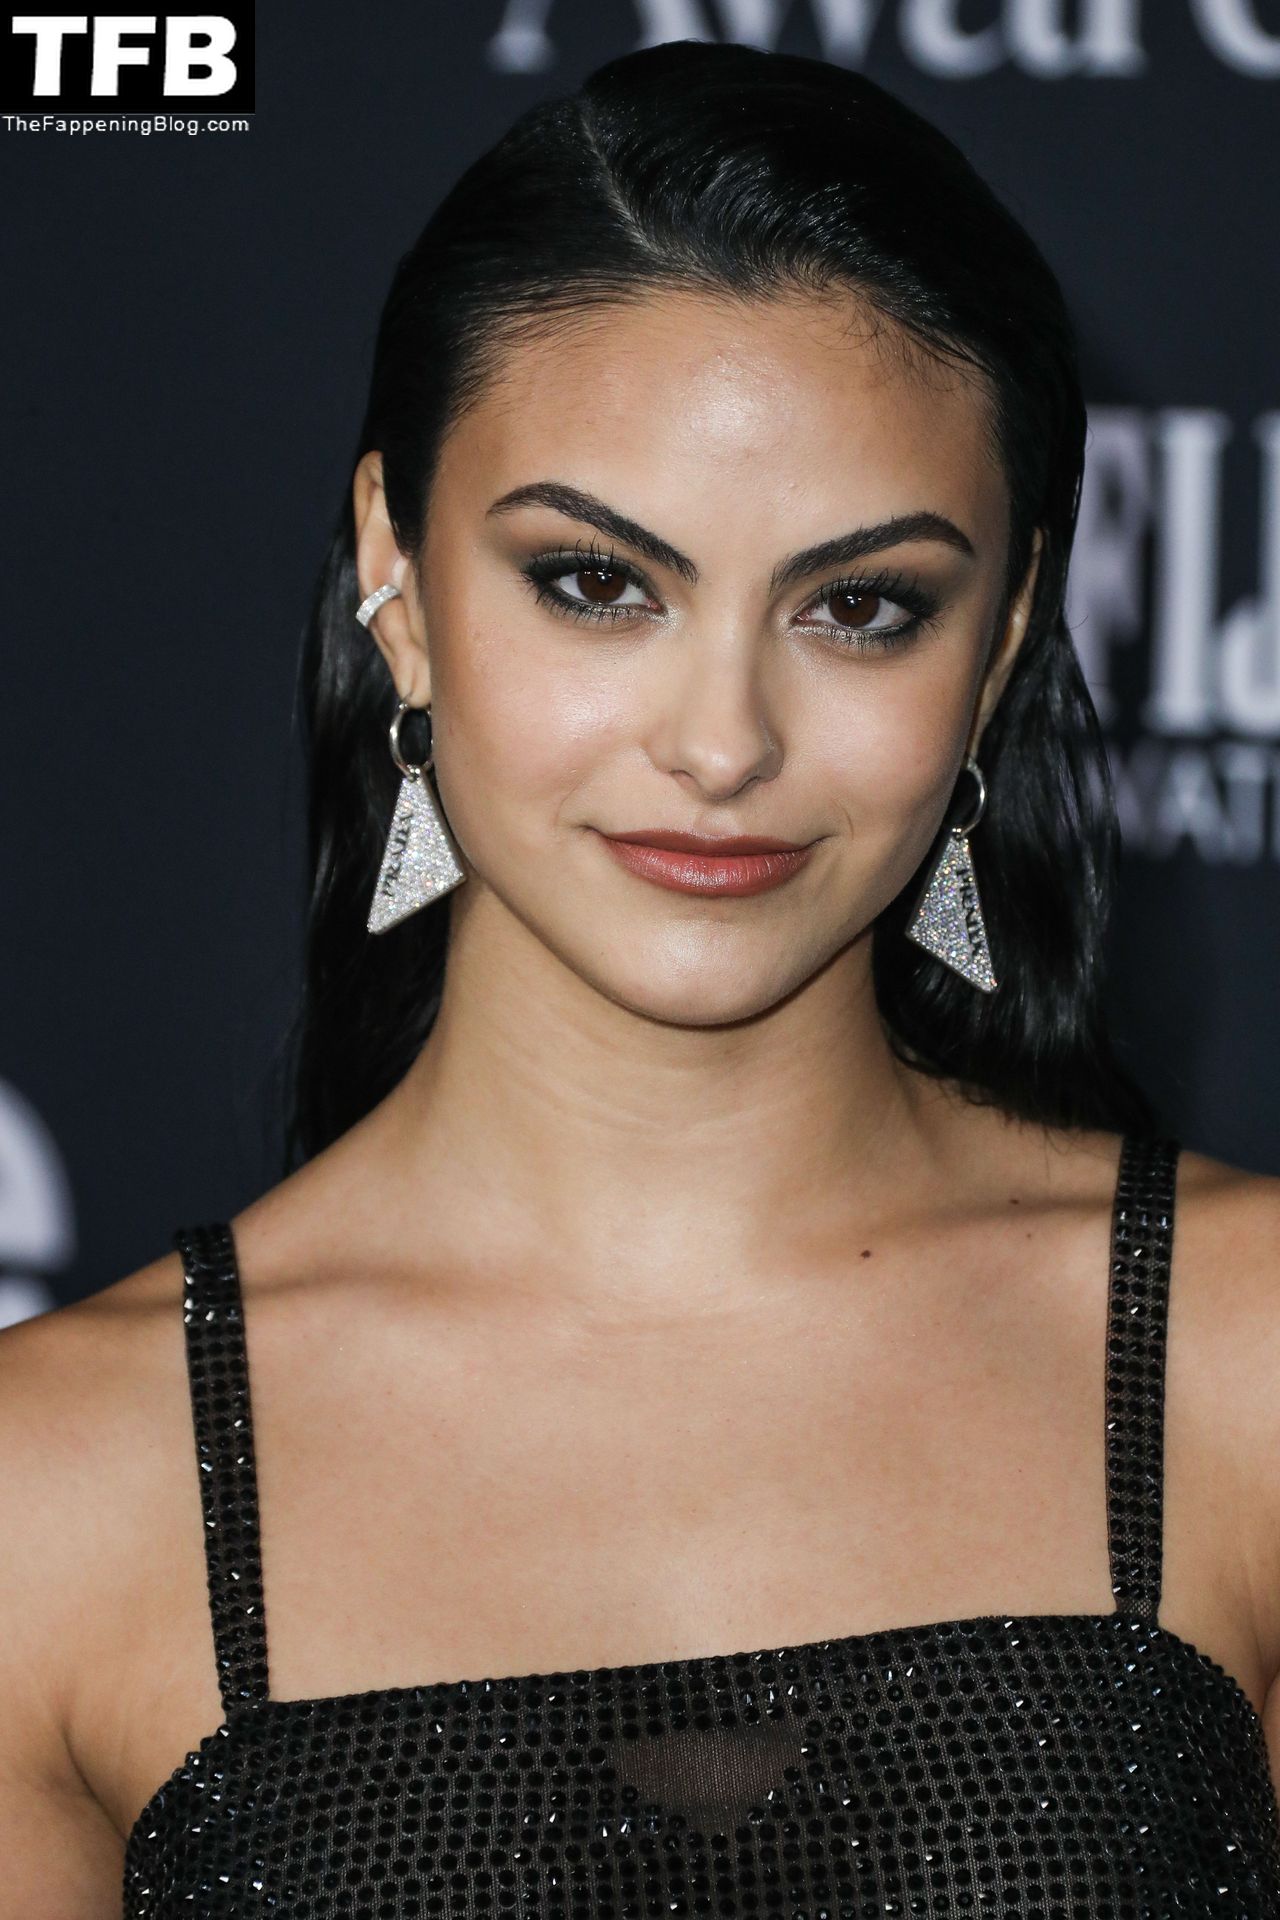 Camila-Mendes-See-Through-Tits-The-Fappening-Blog-7.jpg